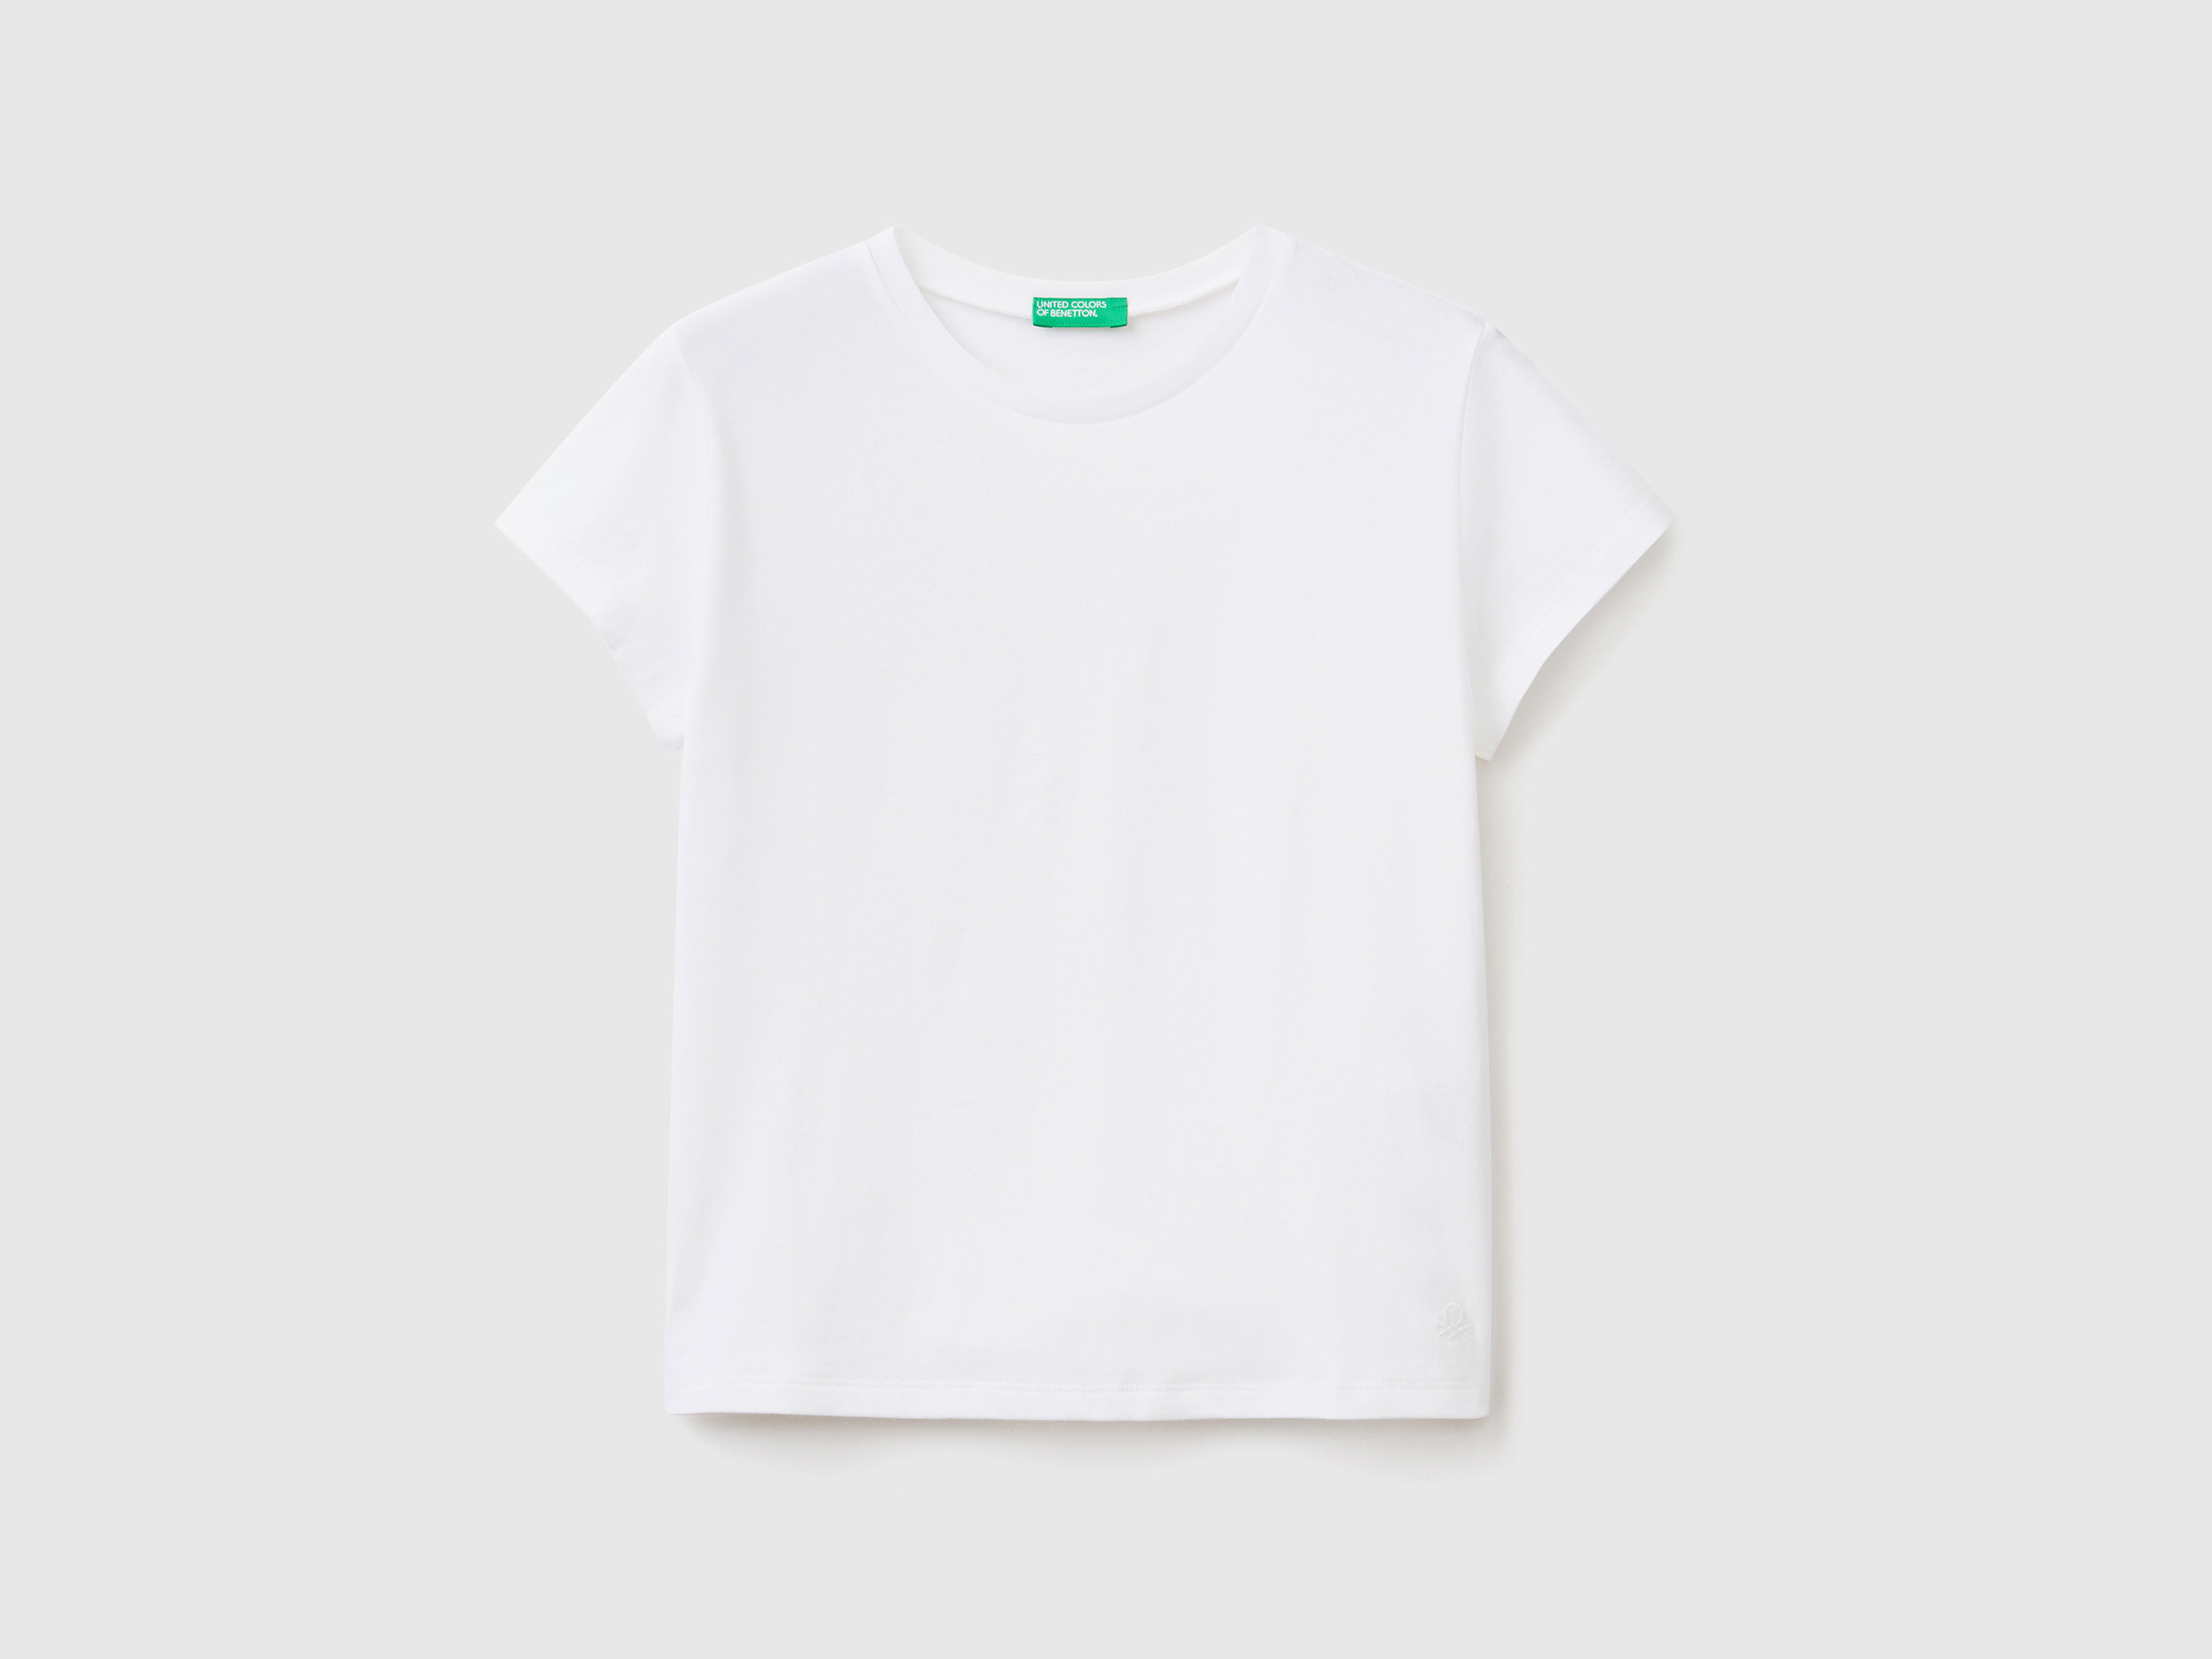 Image of Benetton, T-shirt In Pure Organic Cotton, size XL, White, Kids